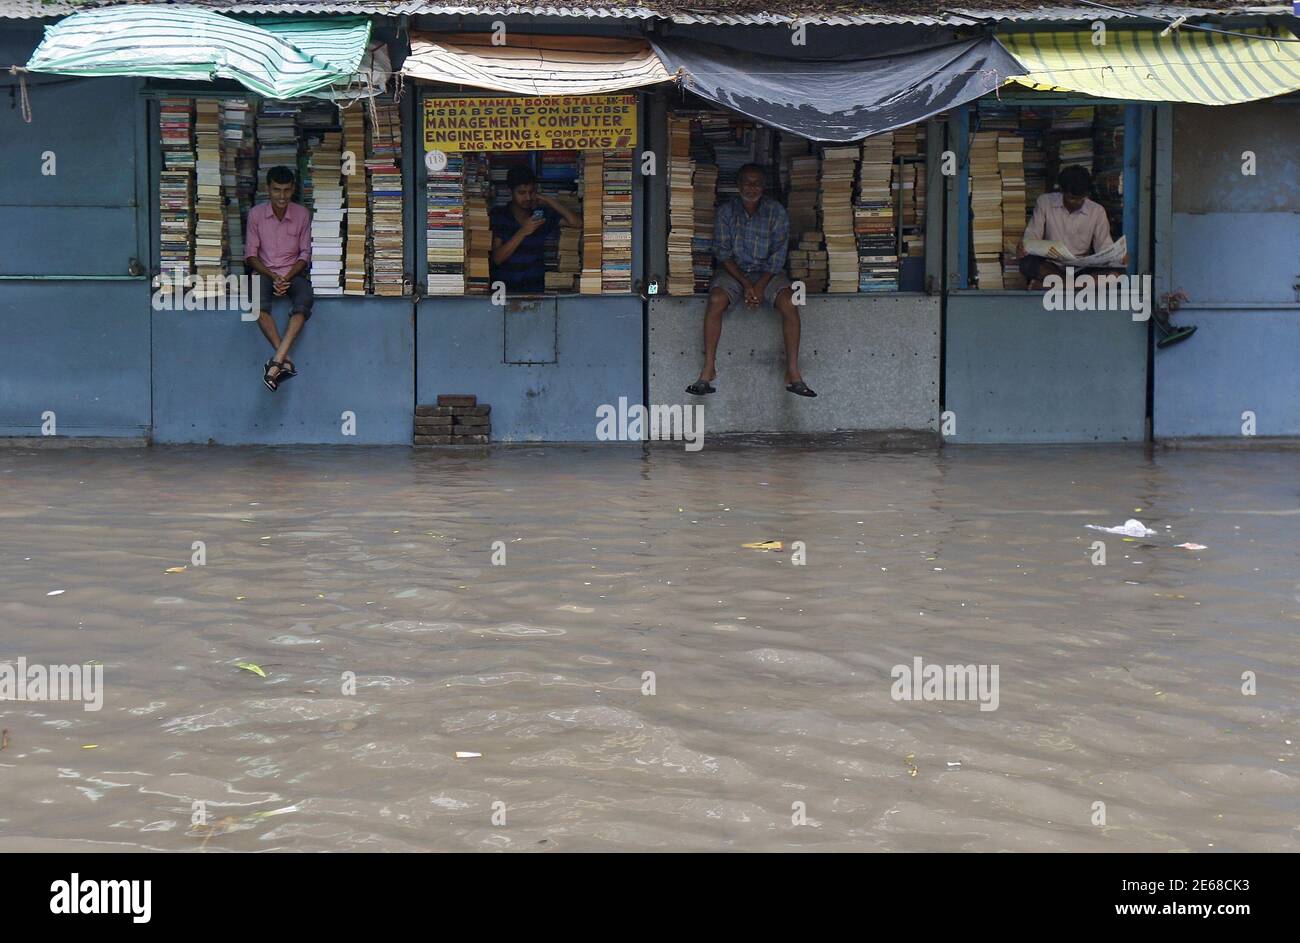 Book sellers wait for customers inside their flooded shops after heavy rainfall in Kolkata, India, July 10, 2015. After drenching India with above-average rains in June, the monsoon has weakened in what is typically the wettest and most crucial month for millions of farmers growing oilseeds, rice, cotton and pulses. Good rainfall this year is key to boosting a rural economy hit by delayed and lower rains last year, as well as keeping a lid on food inflation and giving India's central bank more scope to cut lending rates. REUTERS/Rupak De Chowdhuri Stock Photo